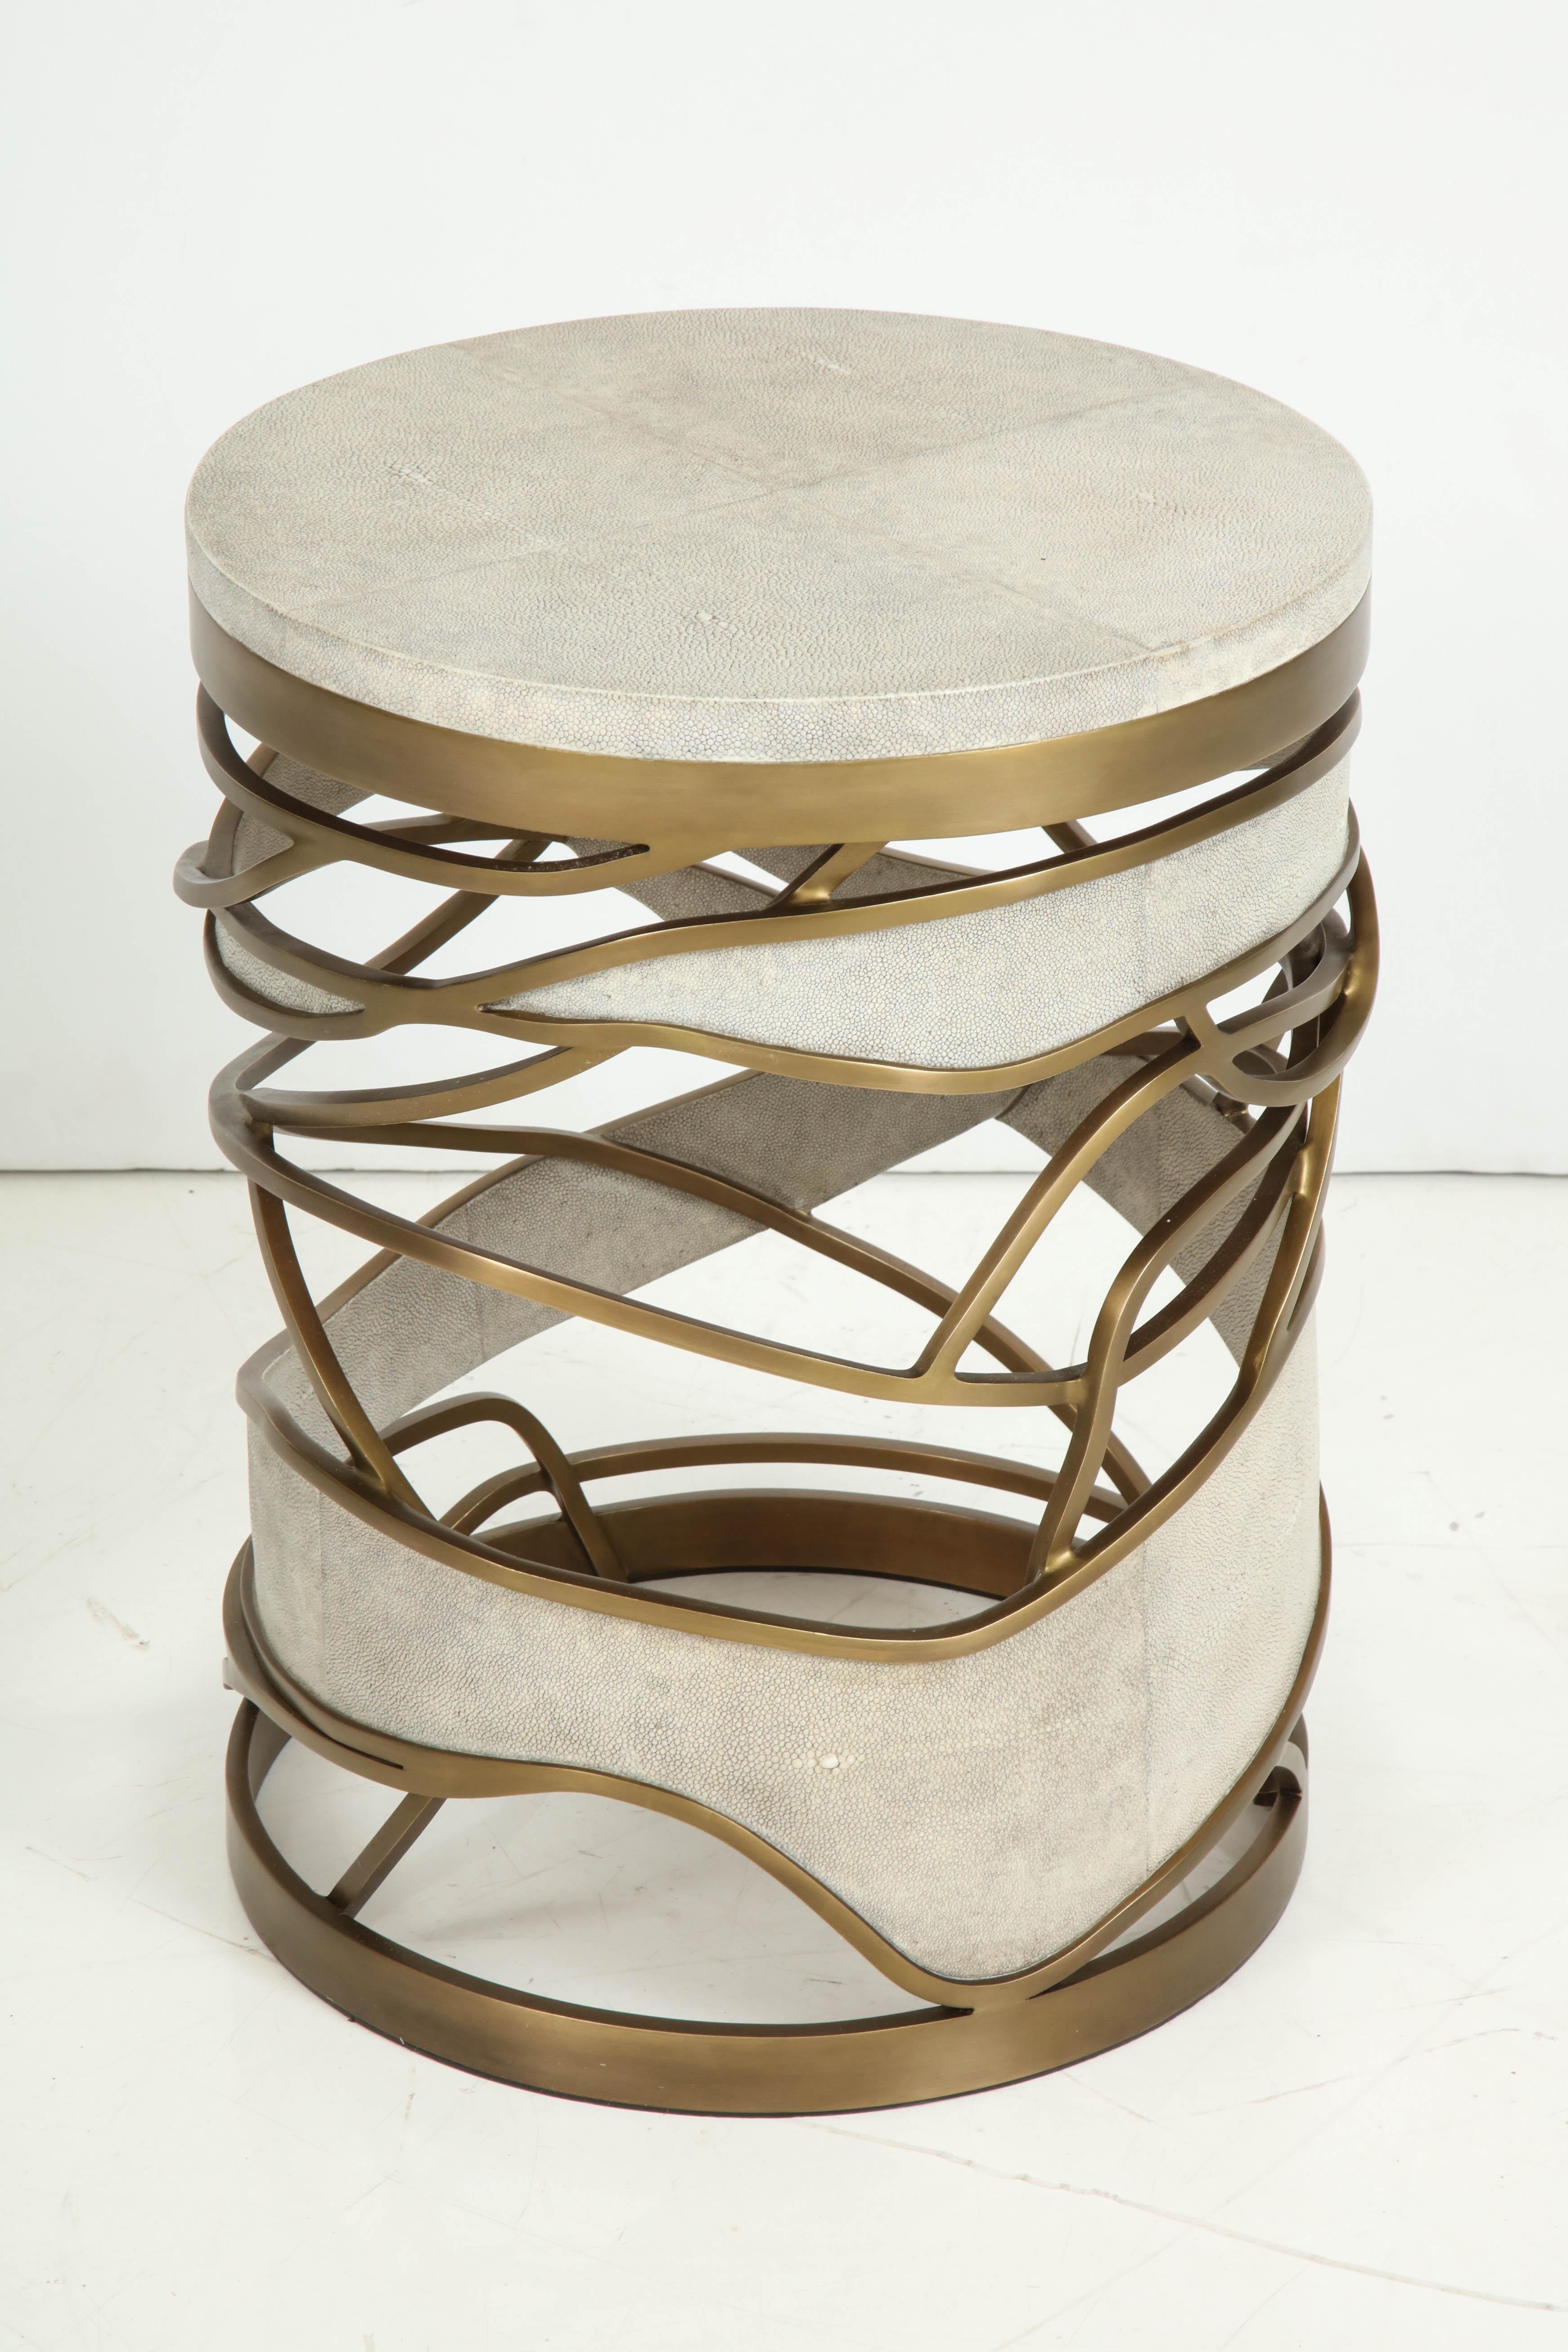 Decorative stool or side table beautifully made of cream shagreen and brass details. 
Production time is 15-16 weeks.